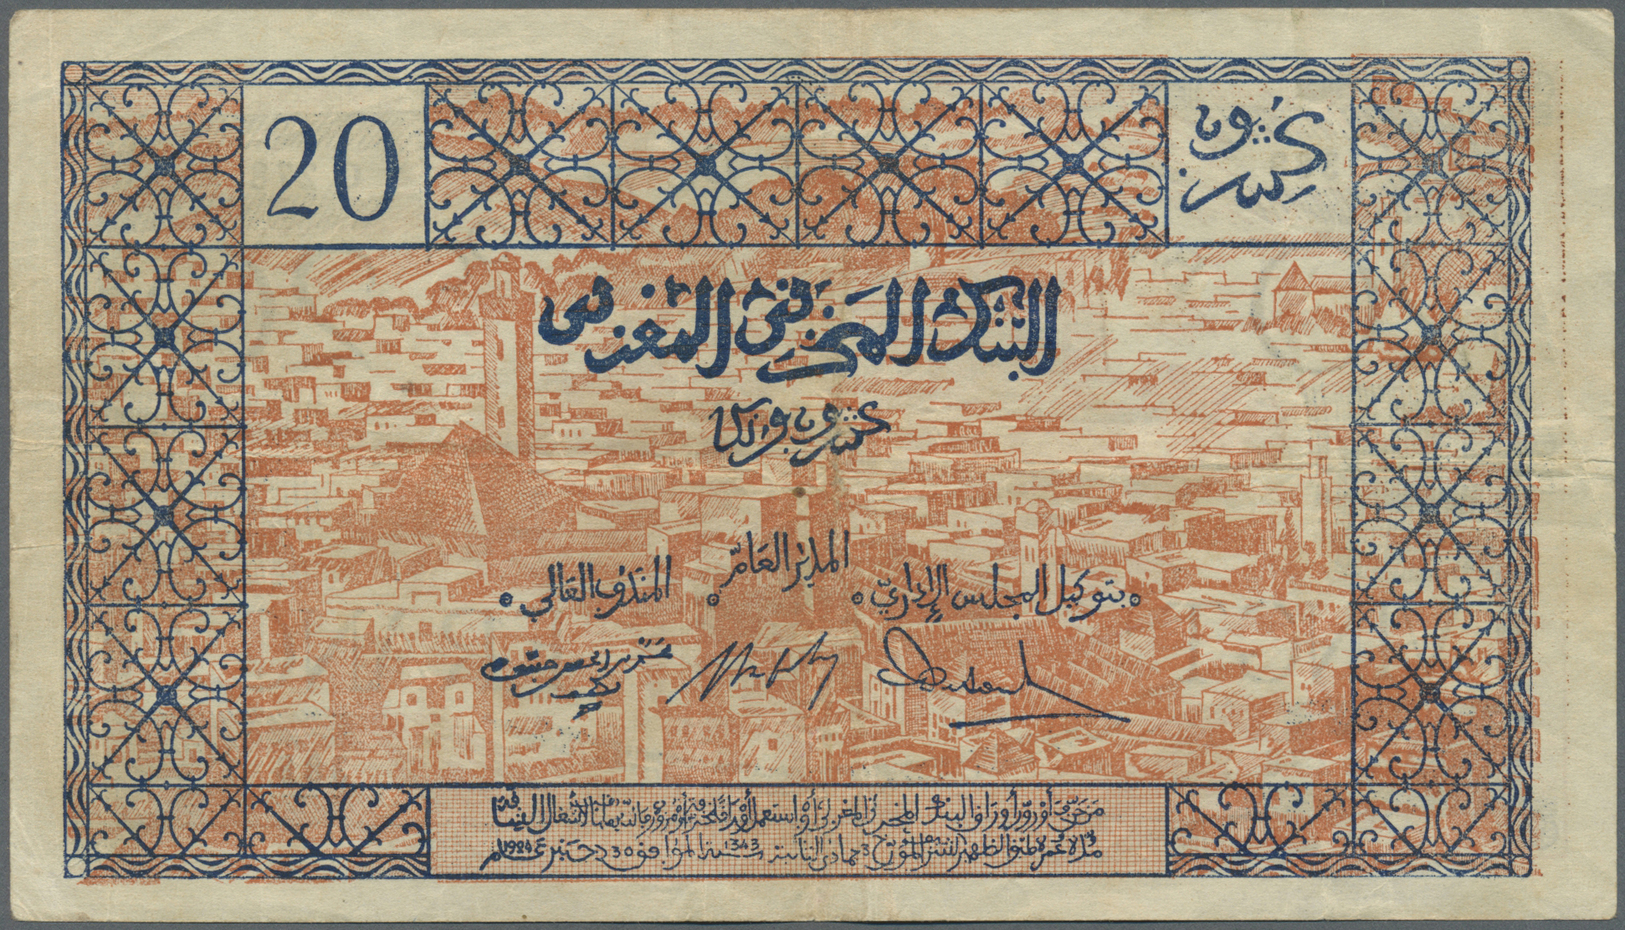 01754 Morocco / Marokko: 20 Francs 1943 P. 39 In Used Condition With Several Folds In Paper, Tiny Center Hole, Minor Bor - Morocco